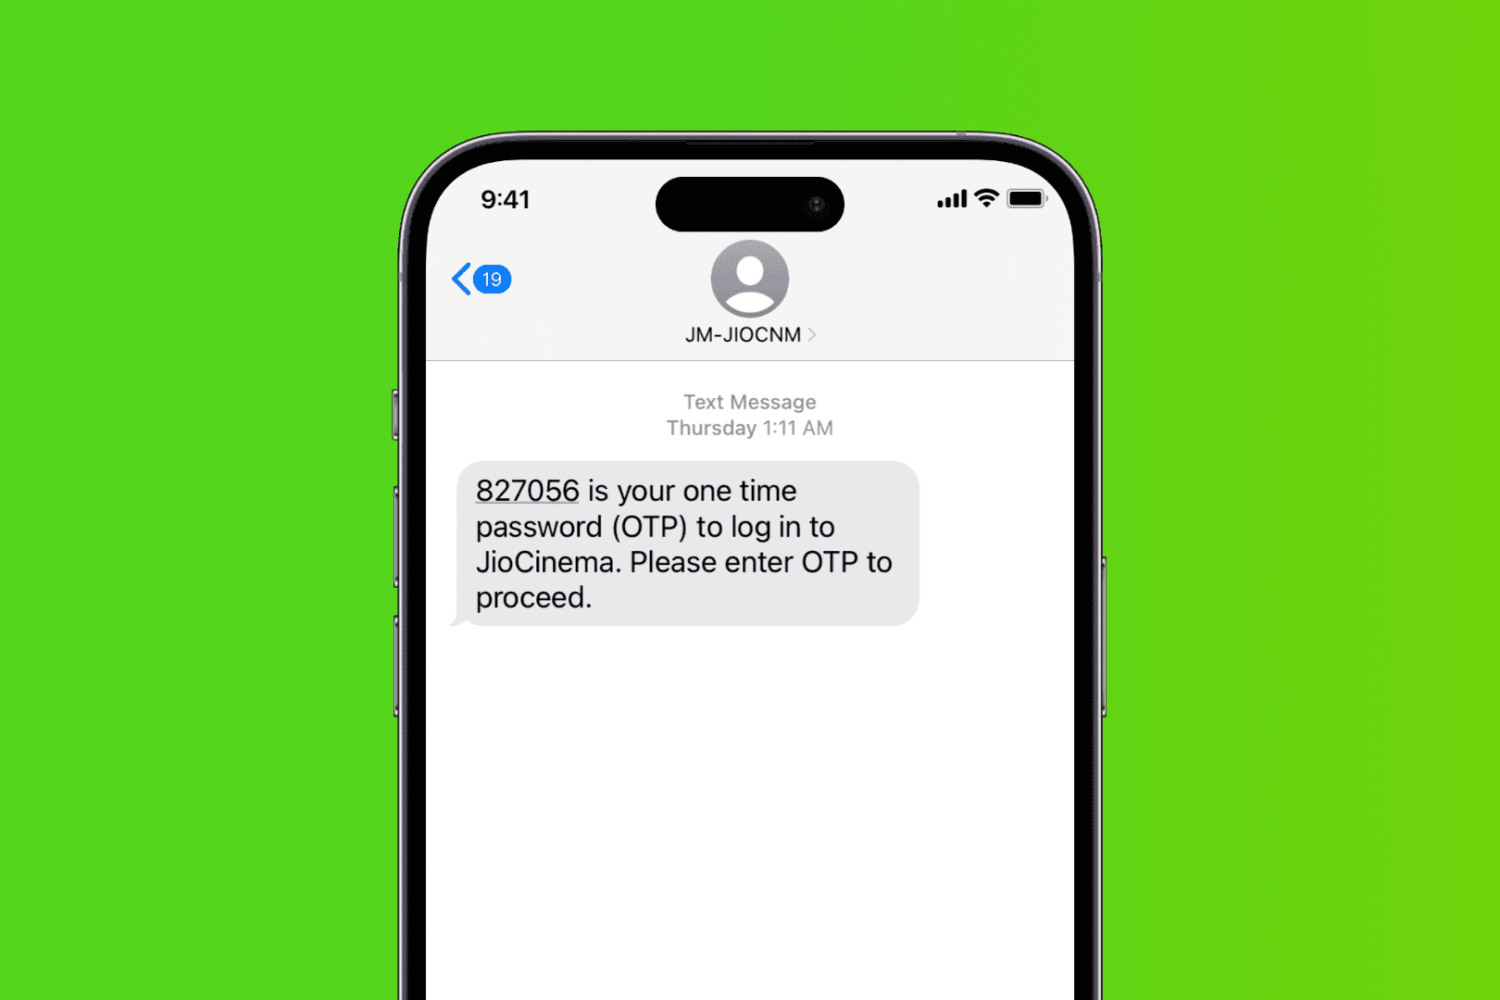 Text message with OTP on iPhone